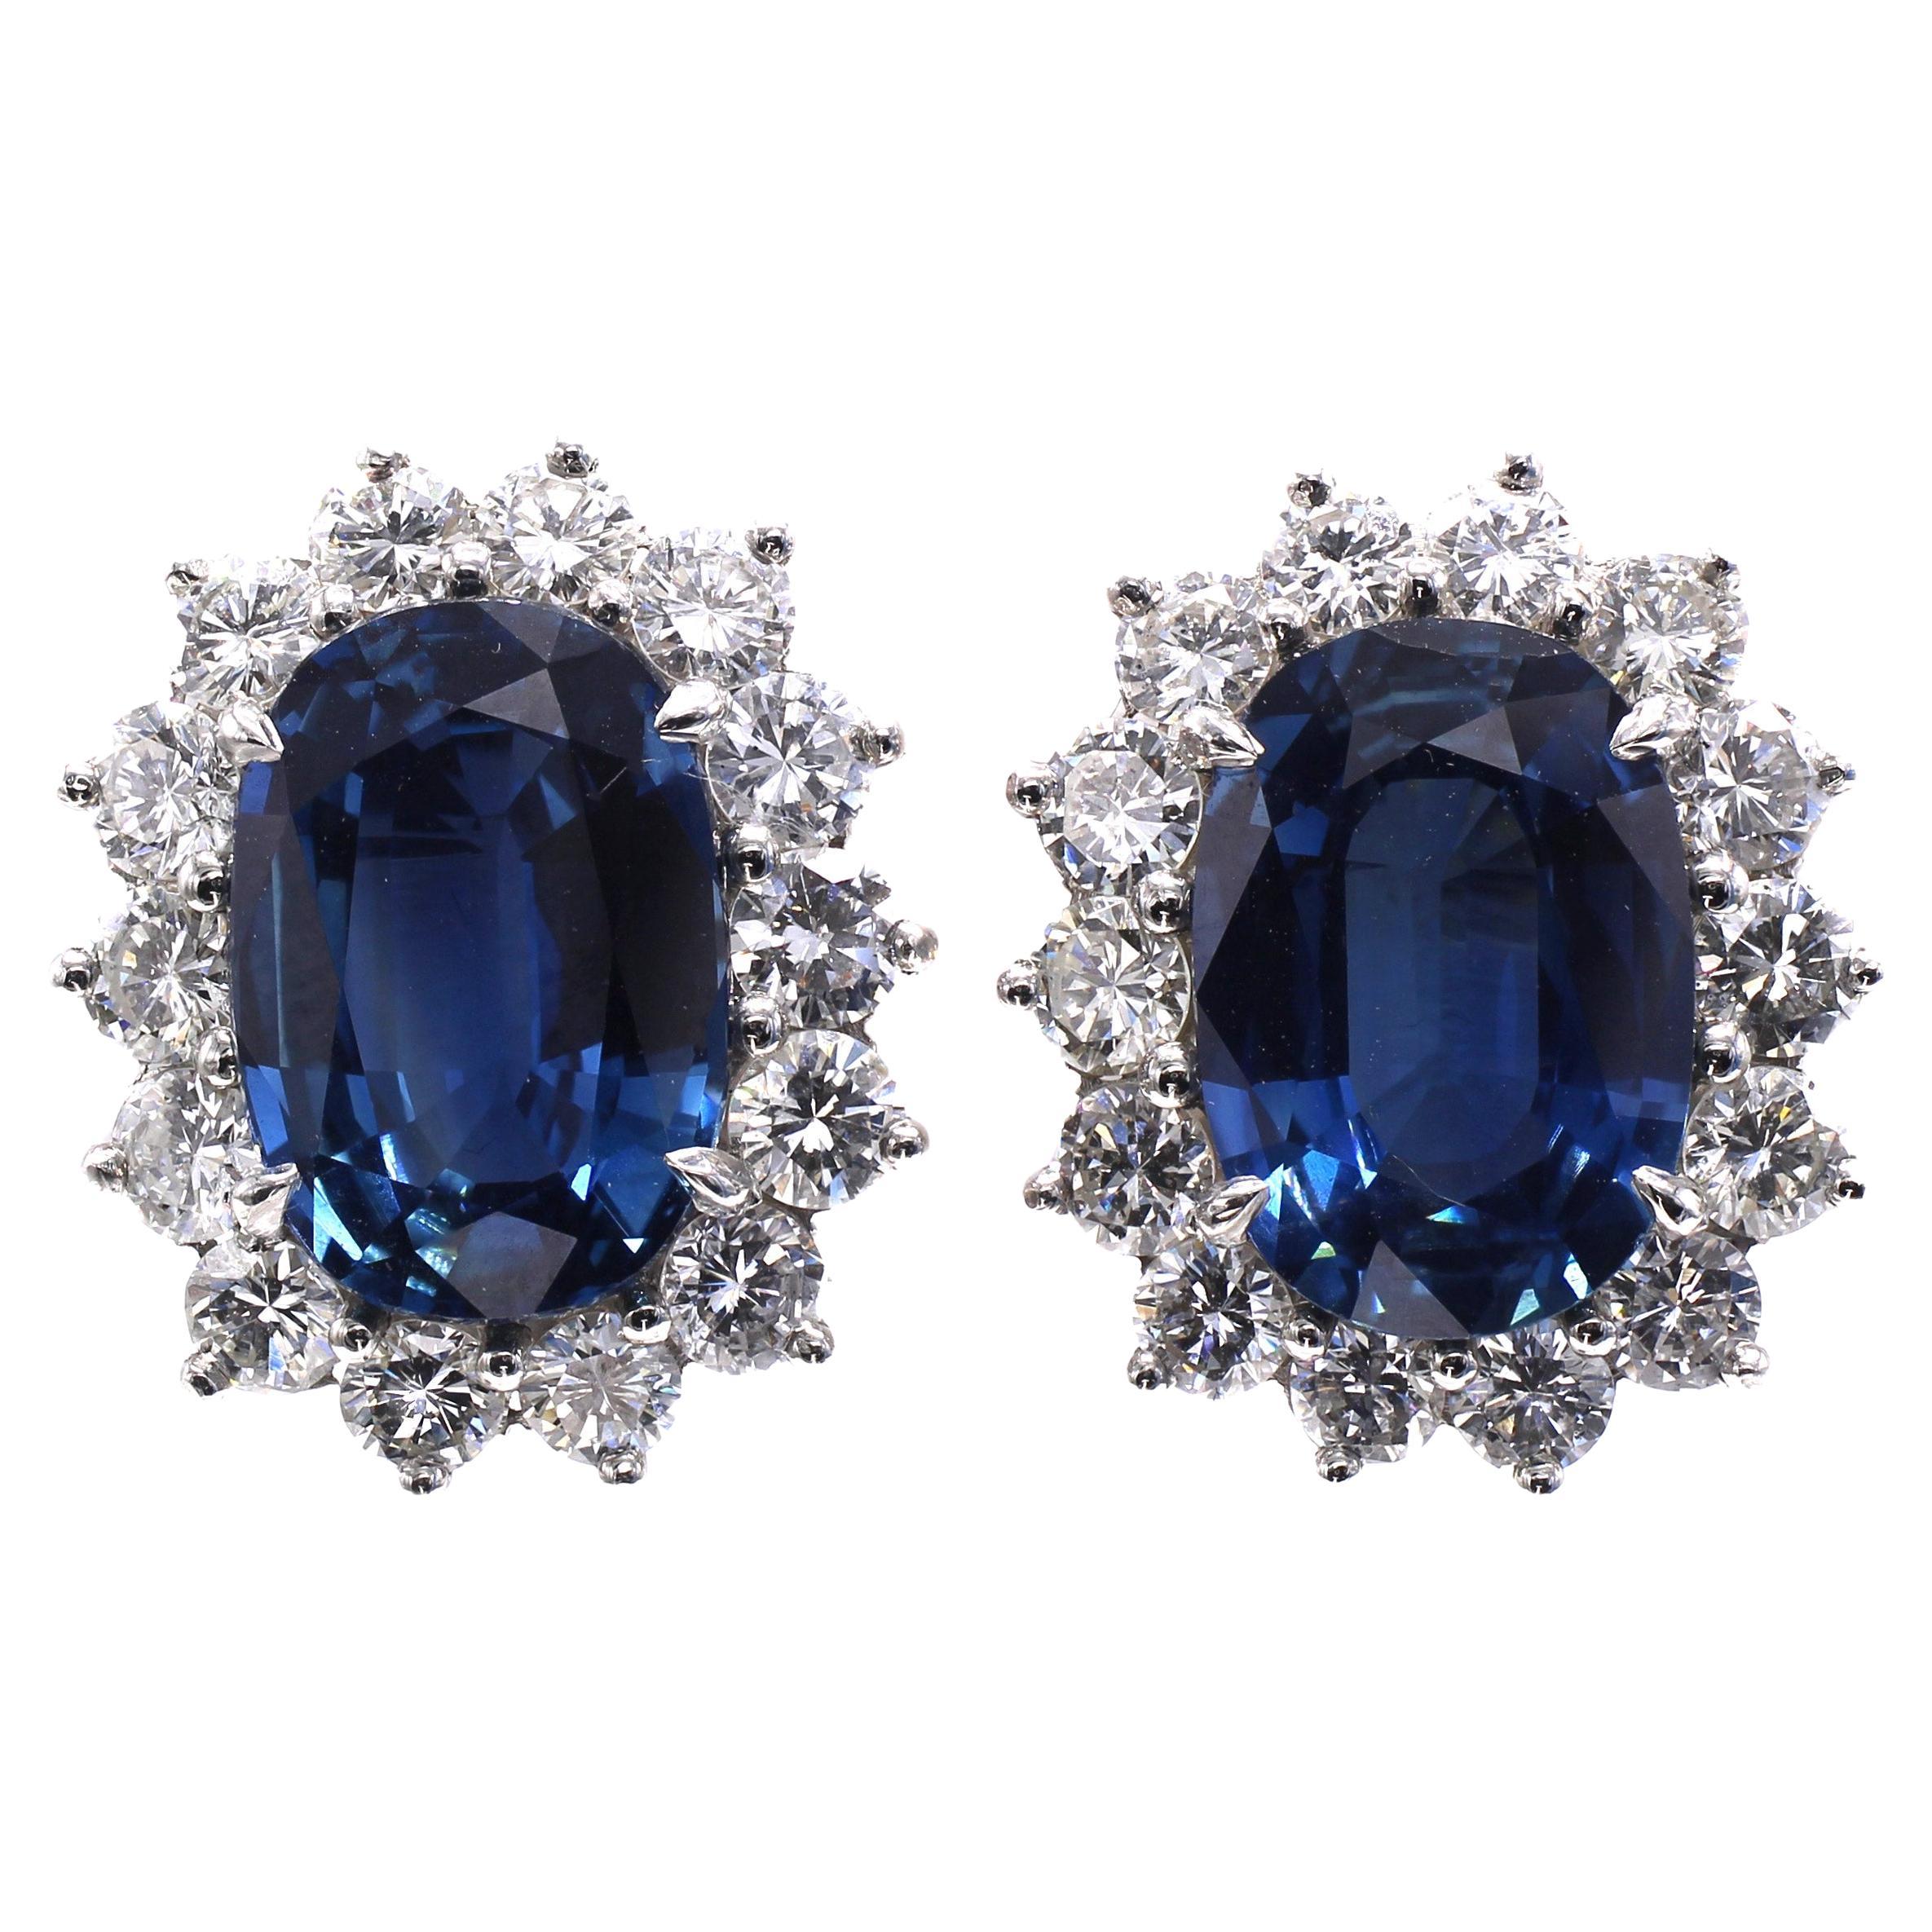 2 perfectly matched elongated oval cut sapphires are the center pieces of this pair of masterfully handcrafted platinum ear clips. The sapphires weighing 7.24 and 8.81 carats are accompanied by a report from the GIA stating the origin as Thailand.